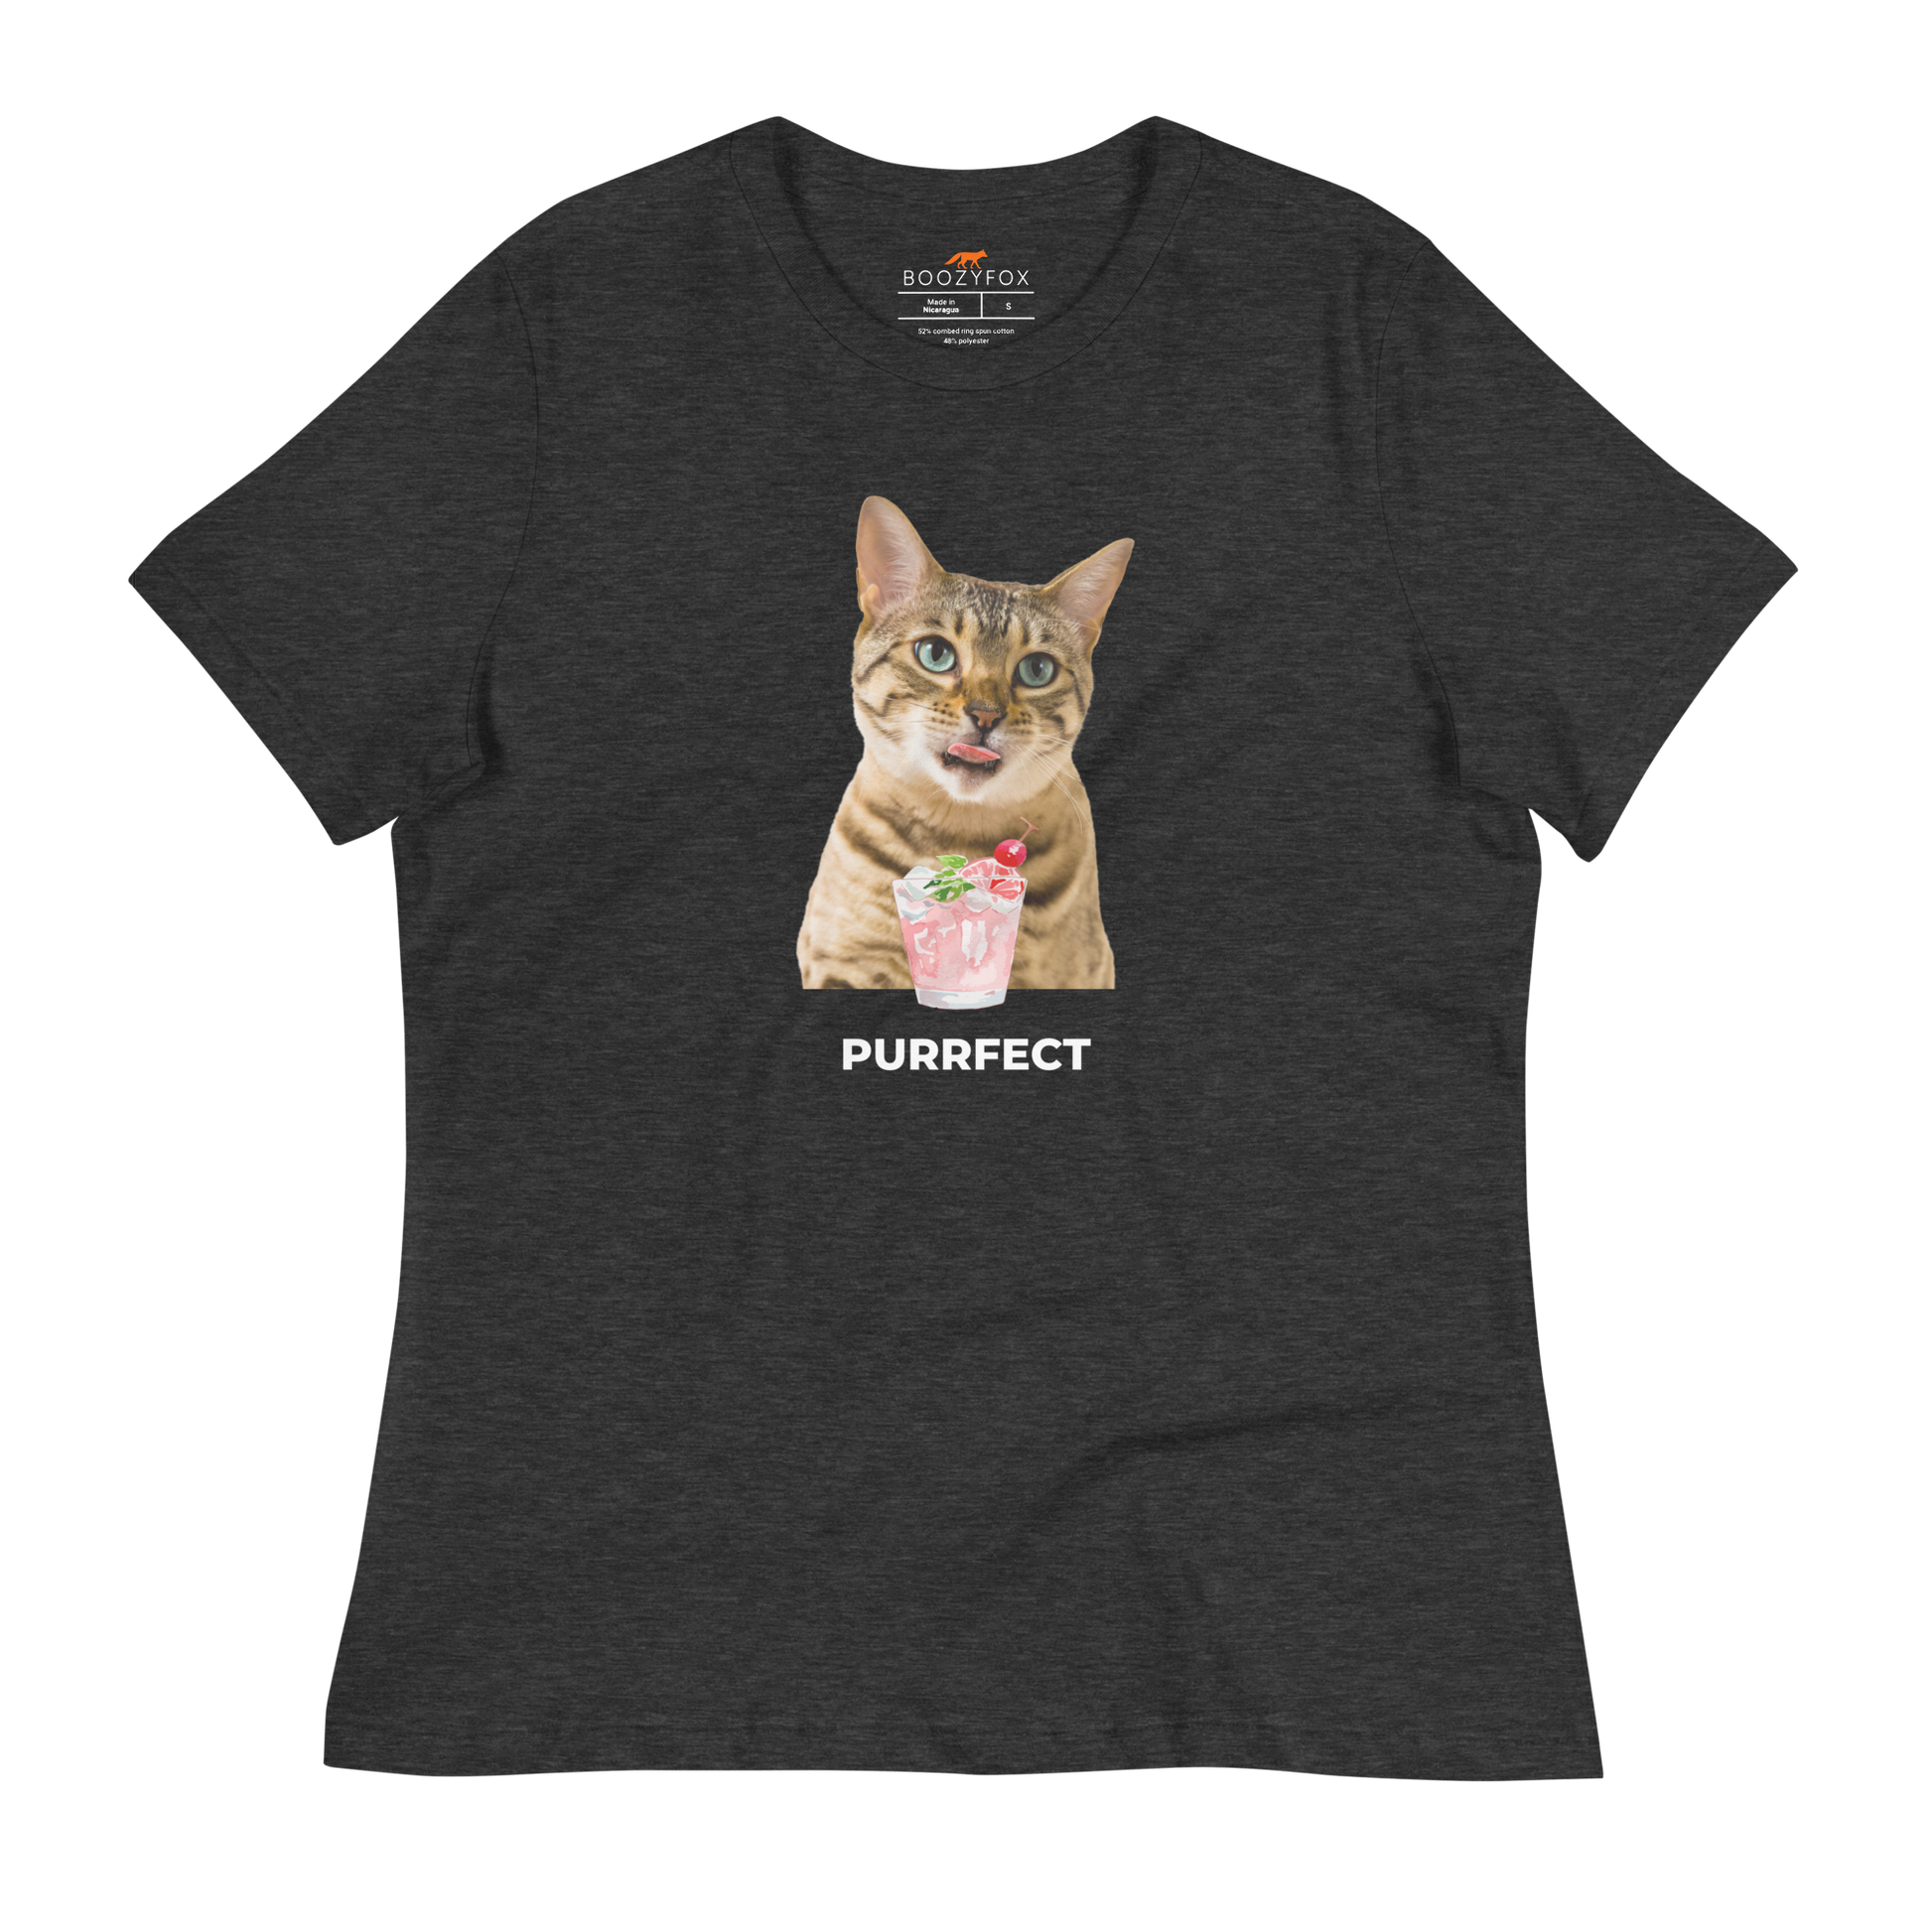 Women's relaxed dark grey heather cat t-shirt featuring a hilarious Purrfect graphic on the chest - Women's Funny Graphic Cat Tees - Boozy Fox